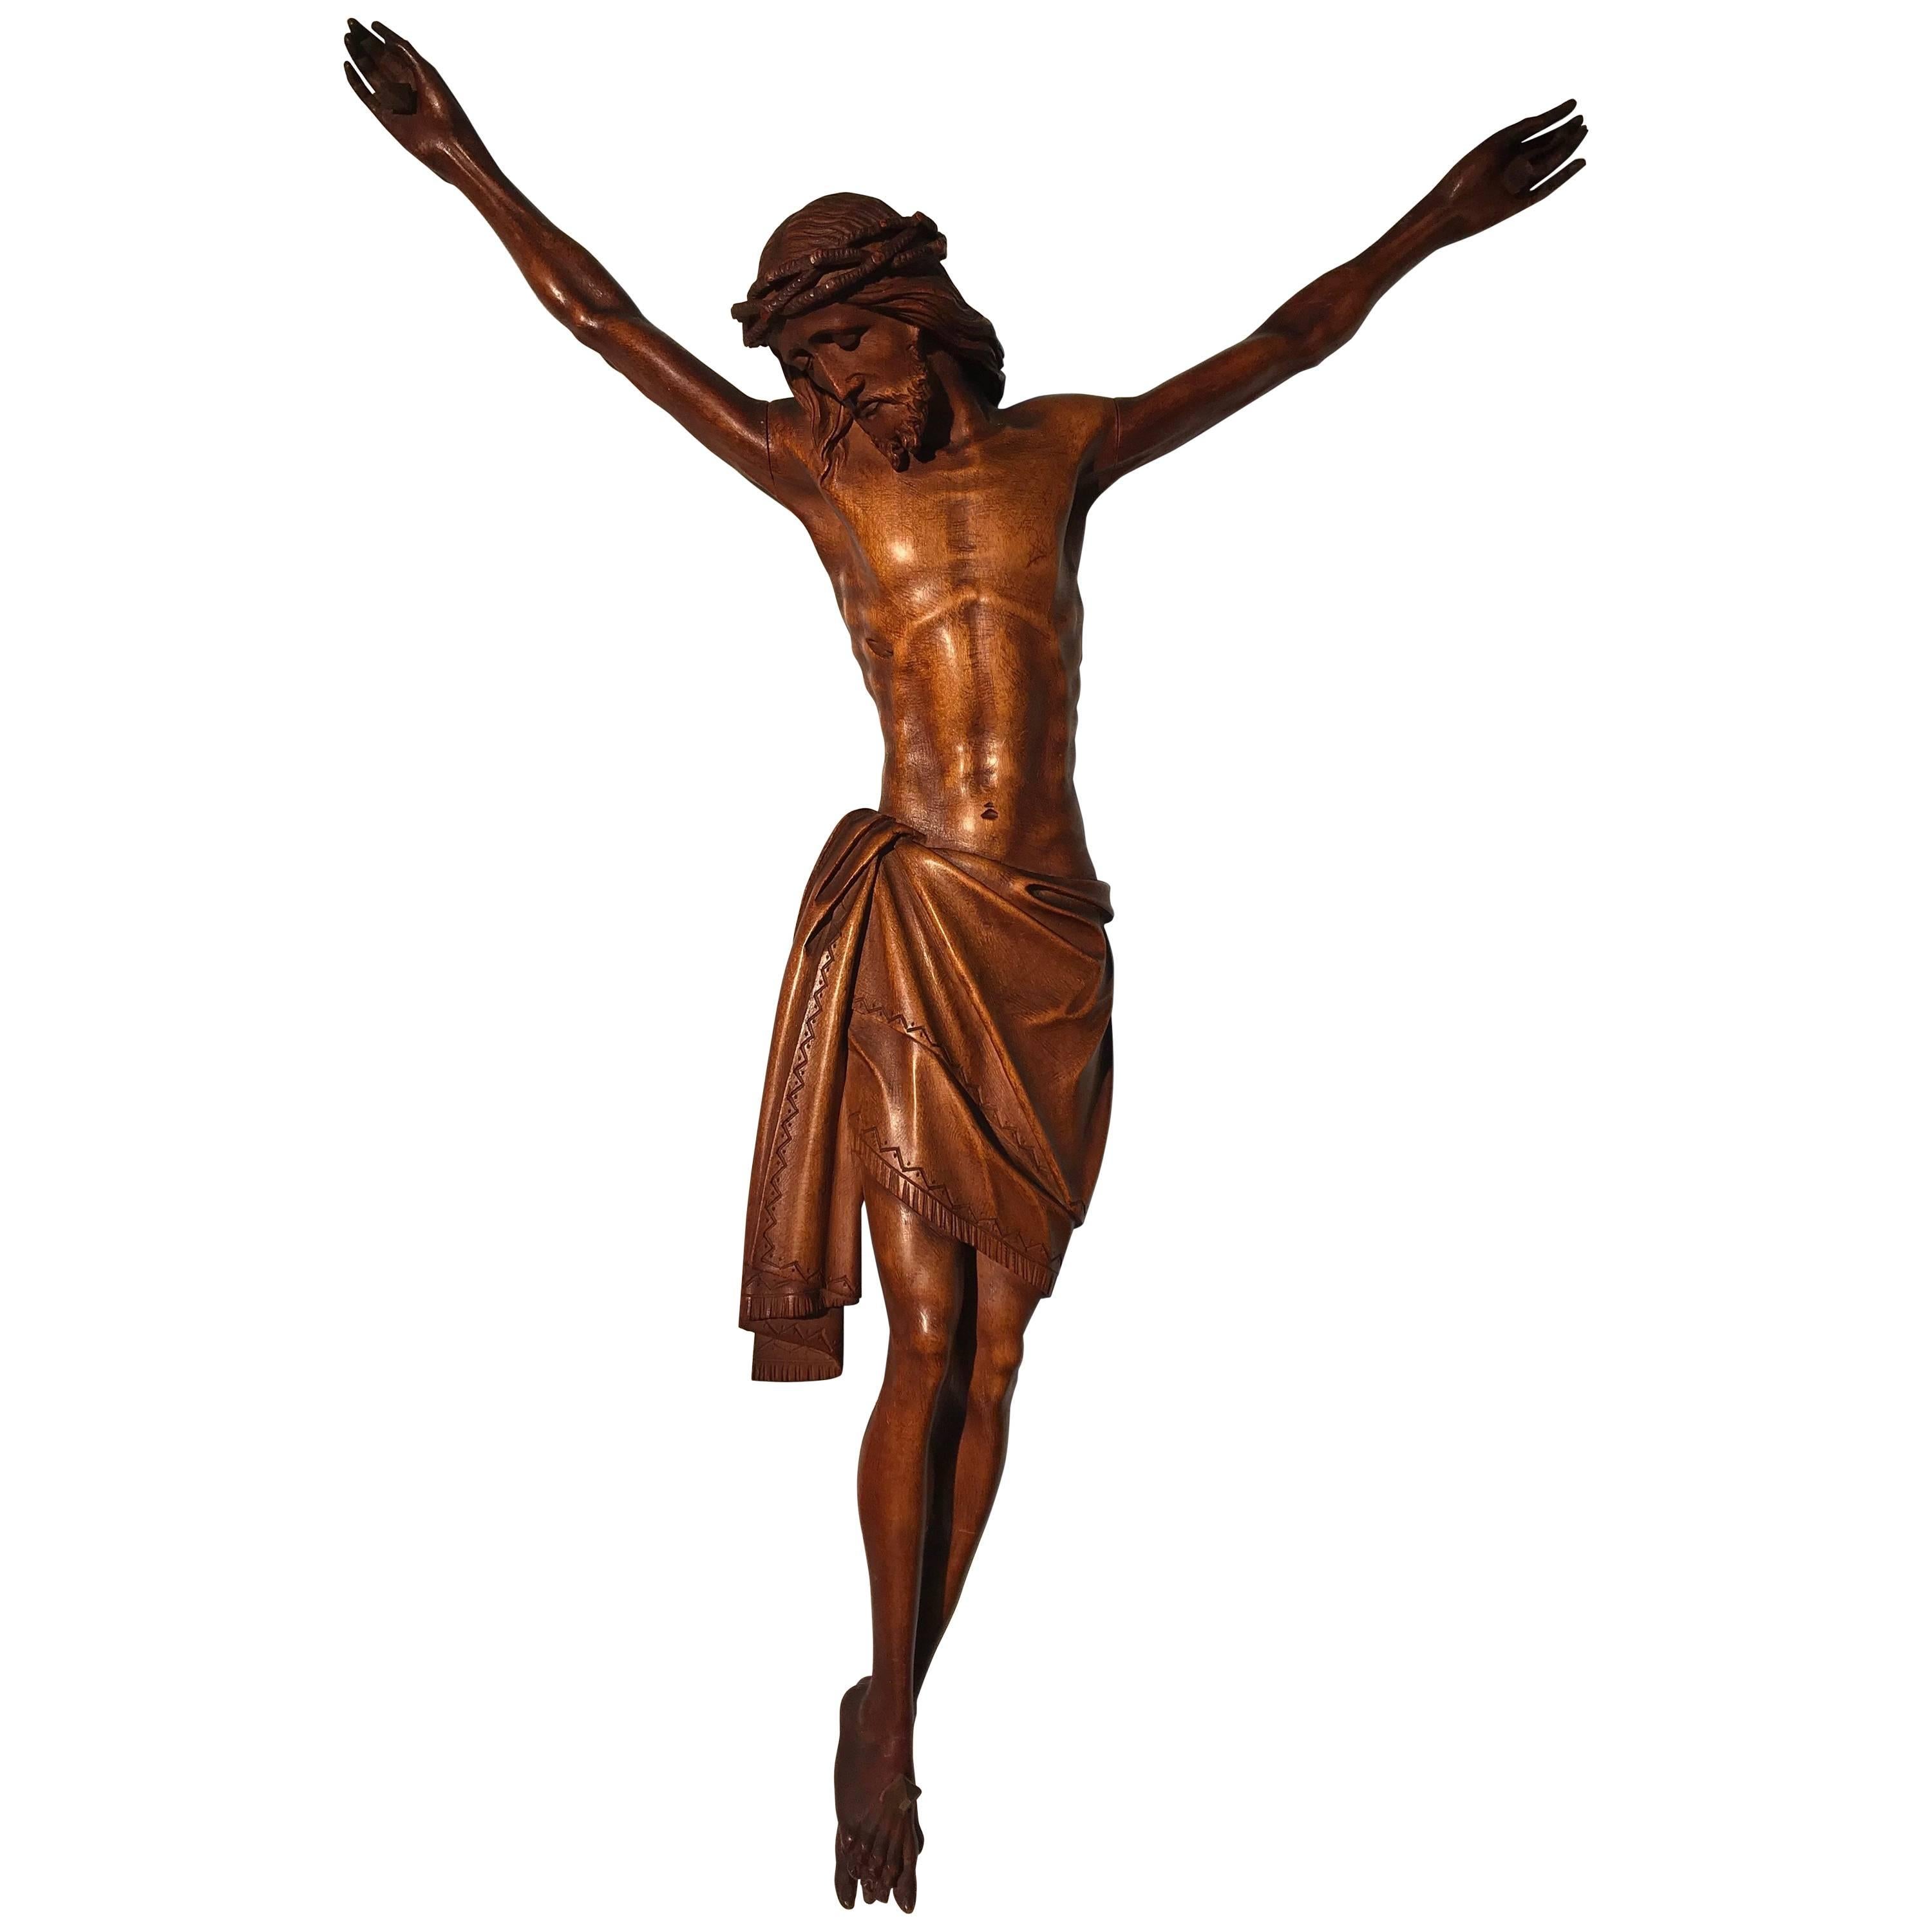 Early 1900s Finest Handcarved Wood Corpus of Christ Sculpture for Wall Mounting